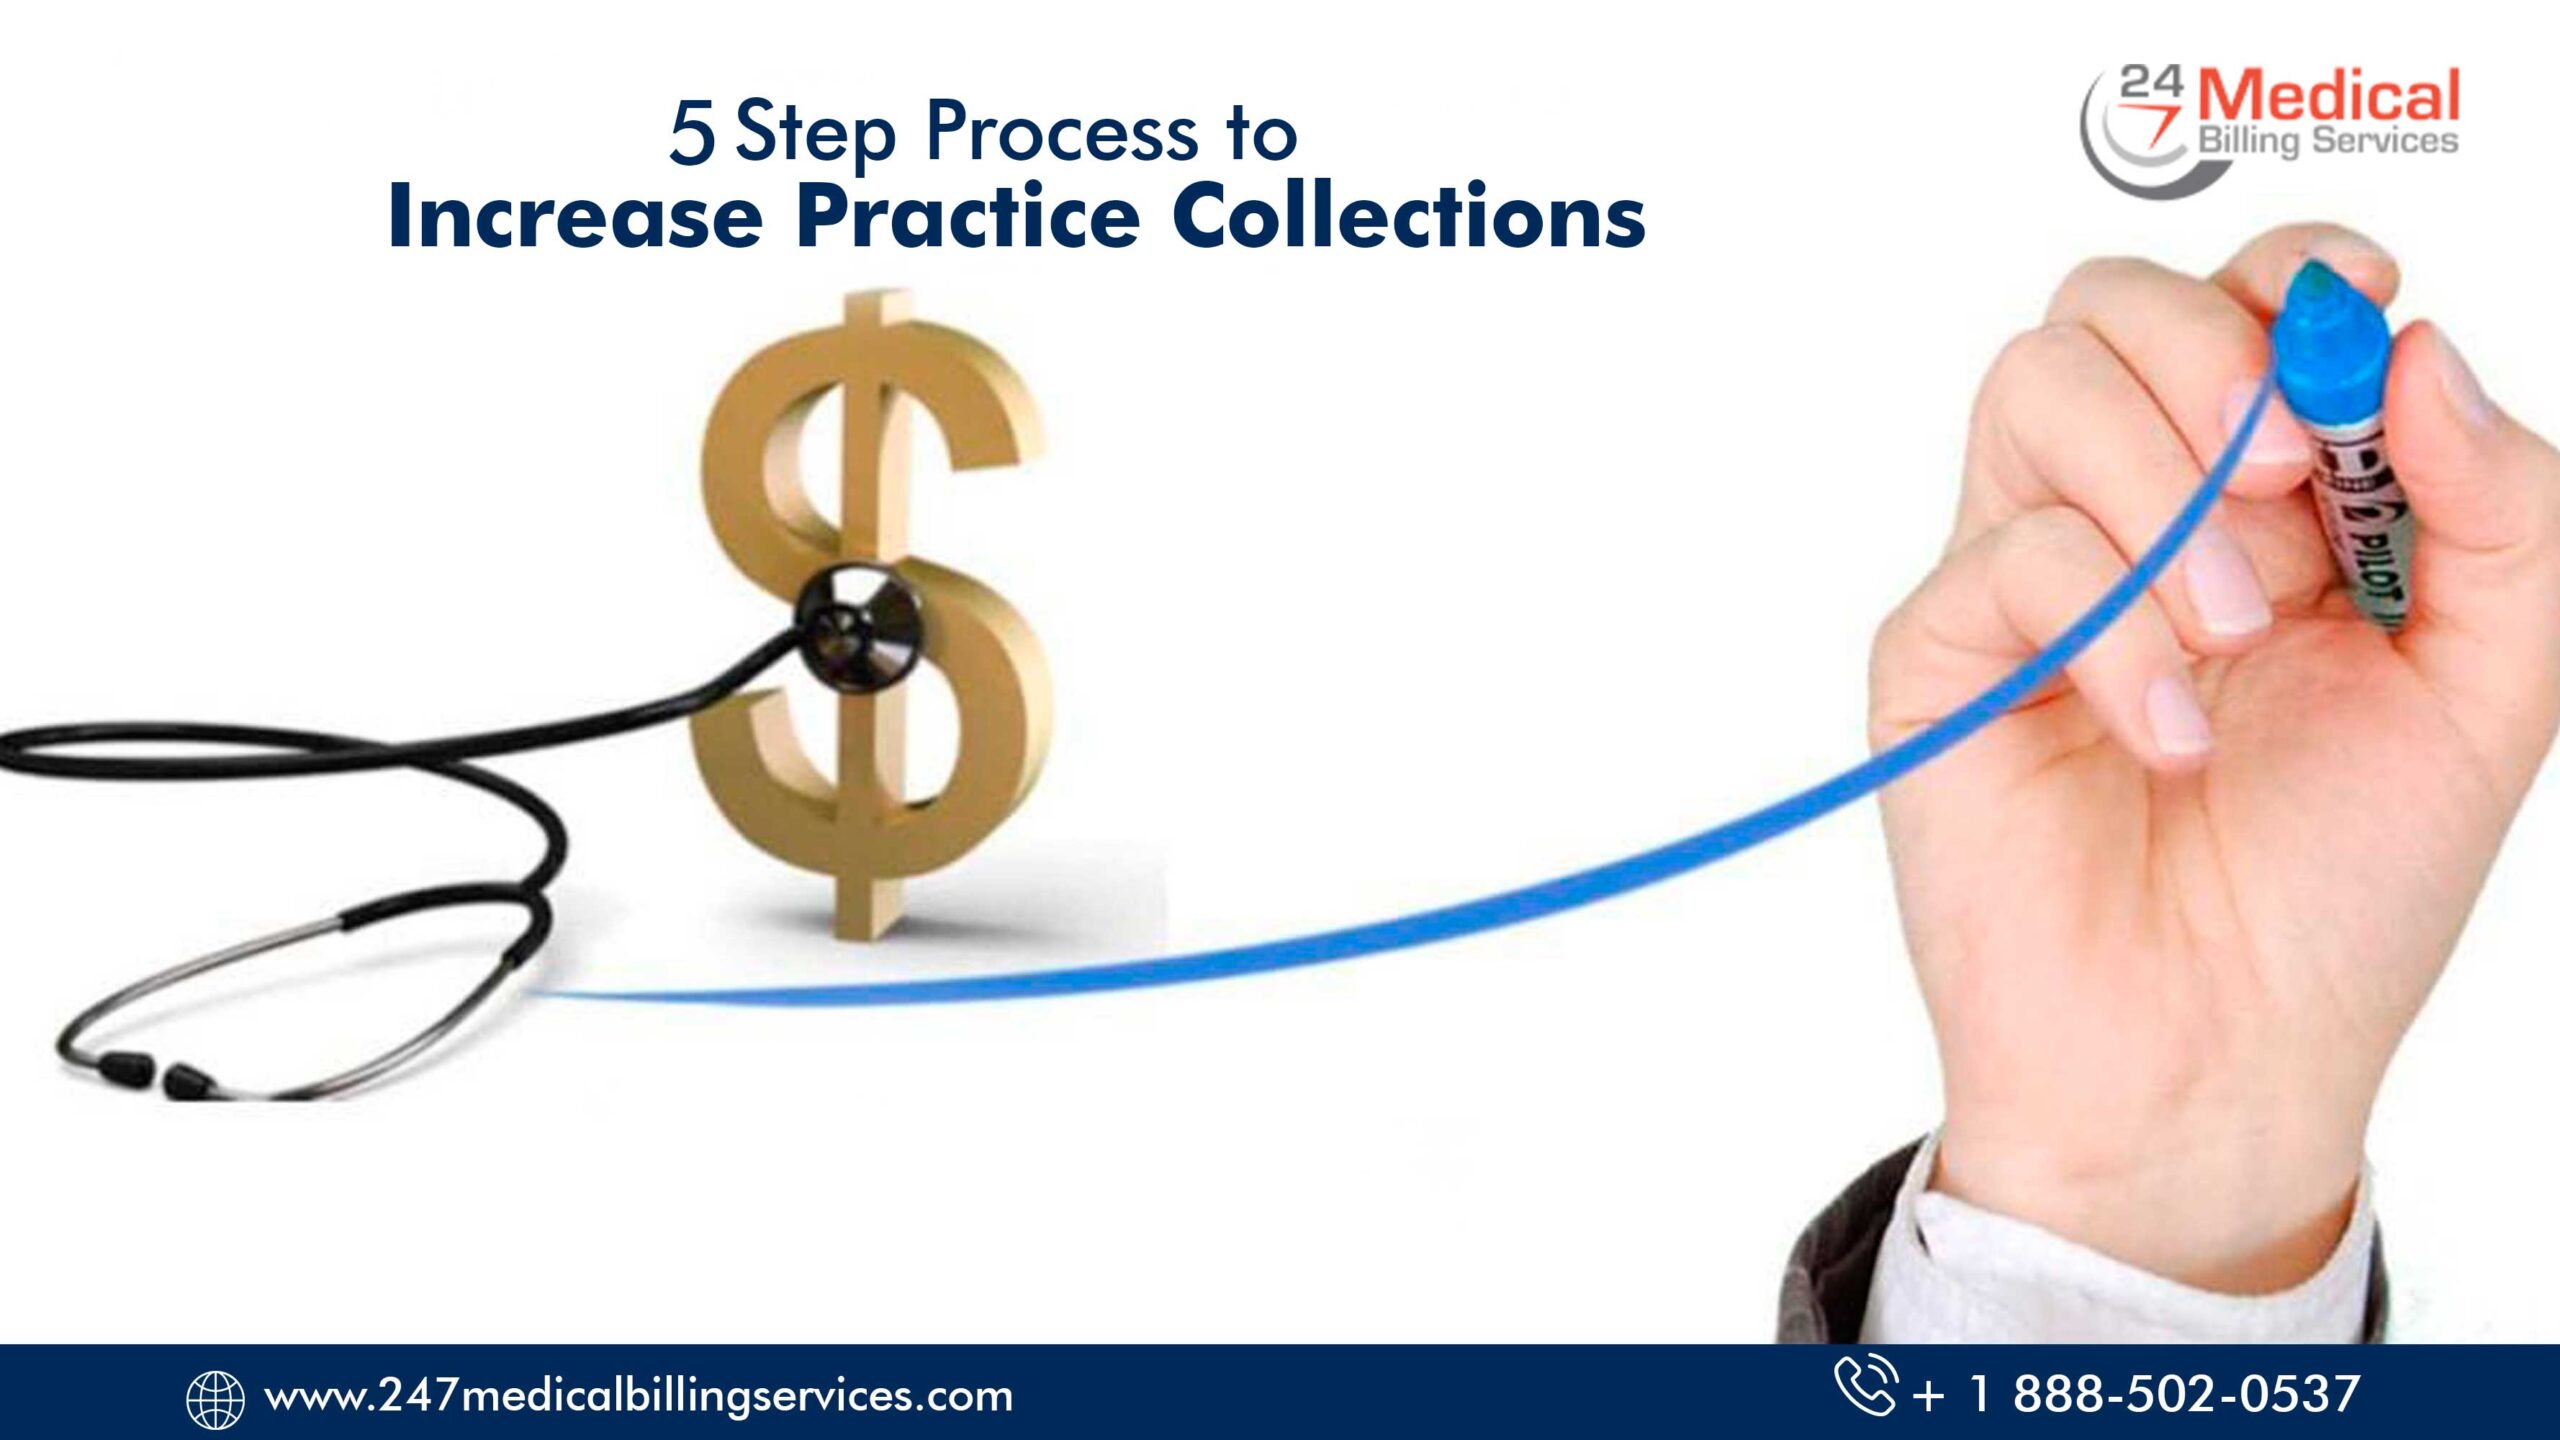  5 Step Process to Increase Practice Collections